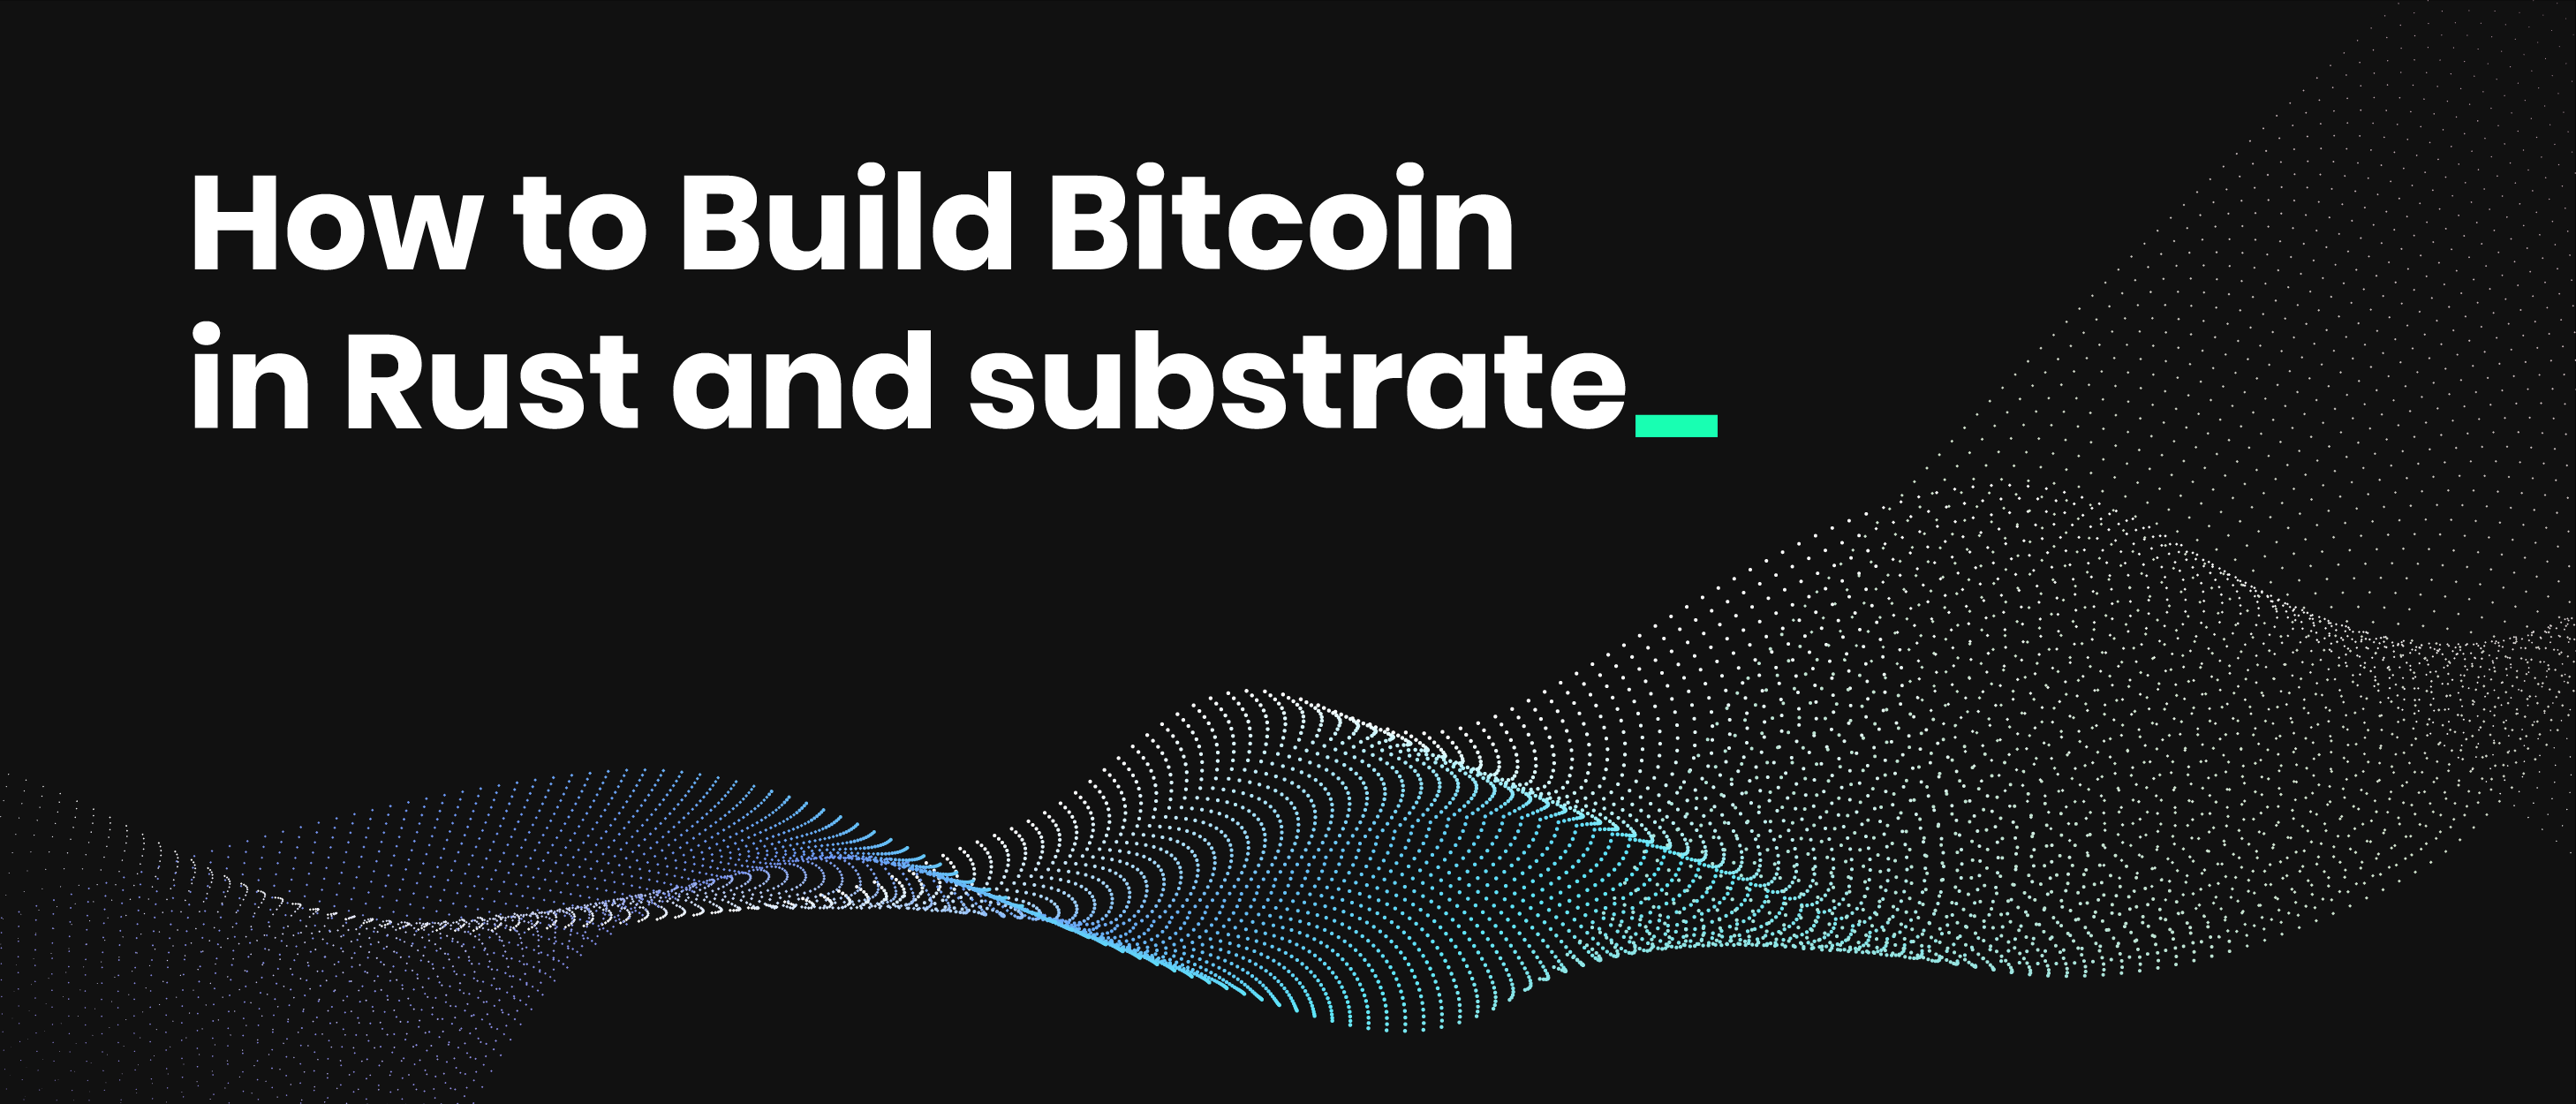 featured image - Building A Blockchain in Rust & Substrate: [A Step-by-Step Guide for Developers]